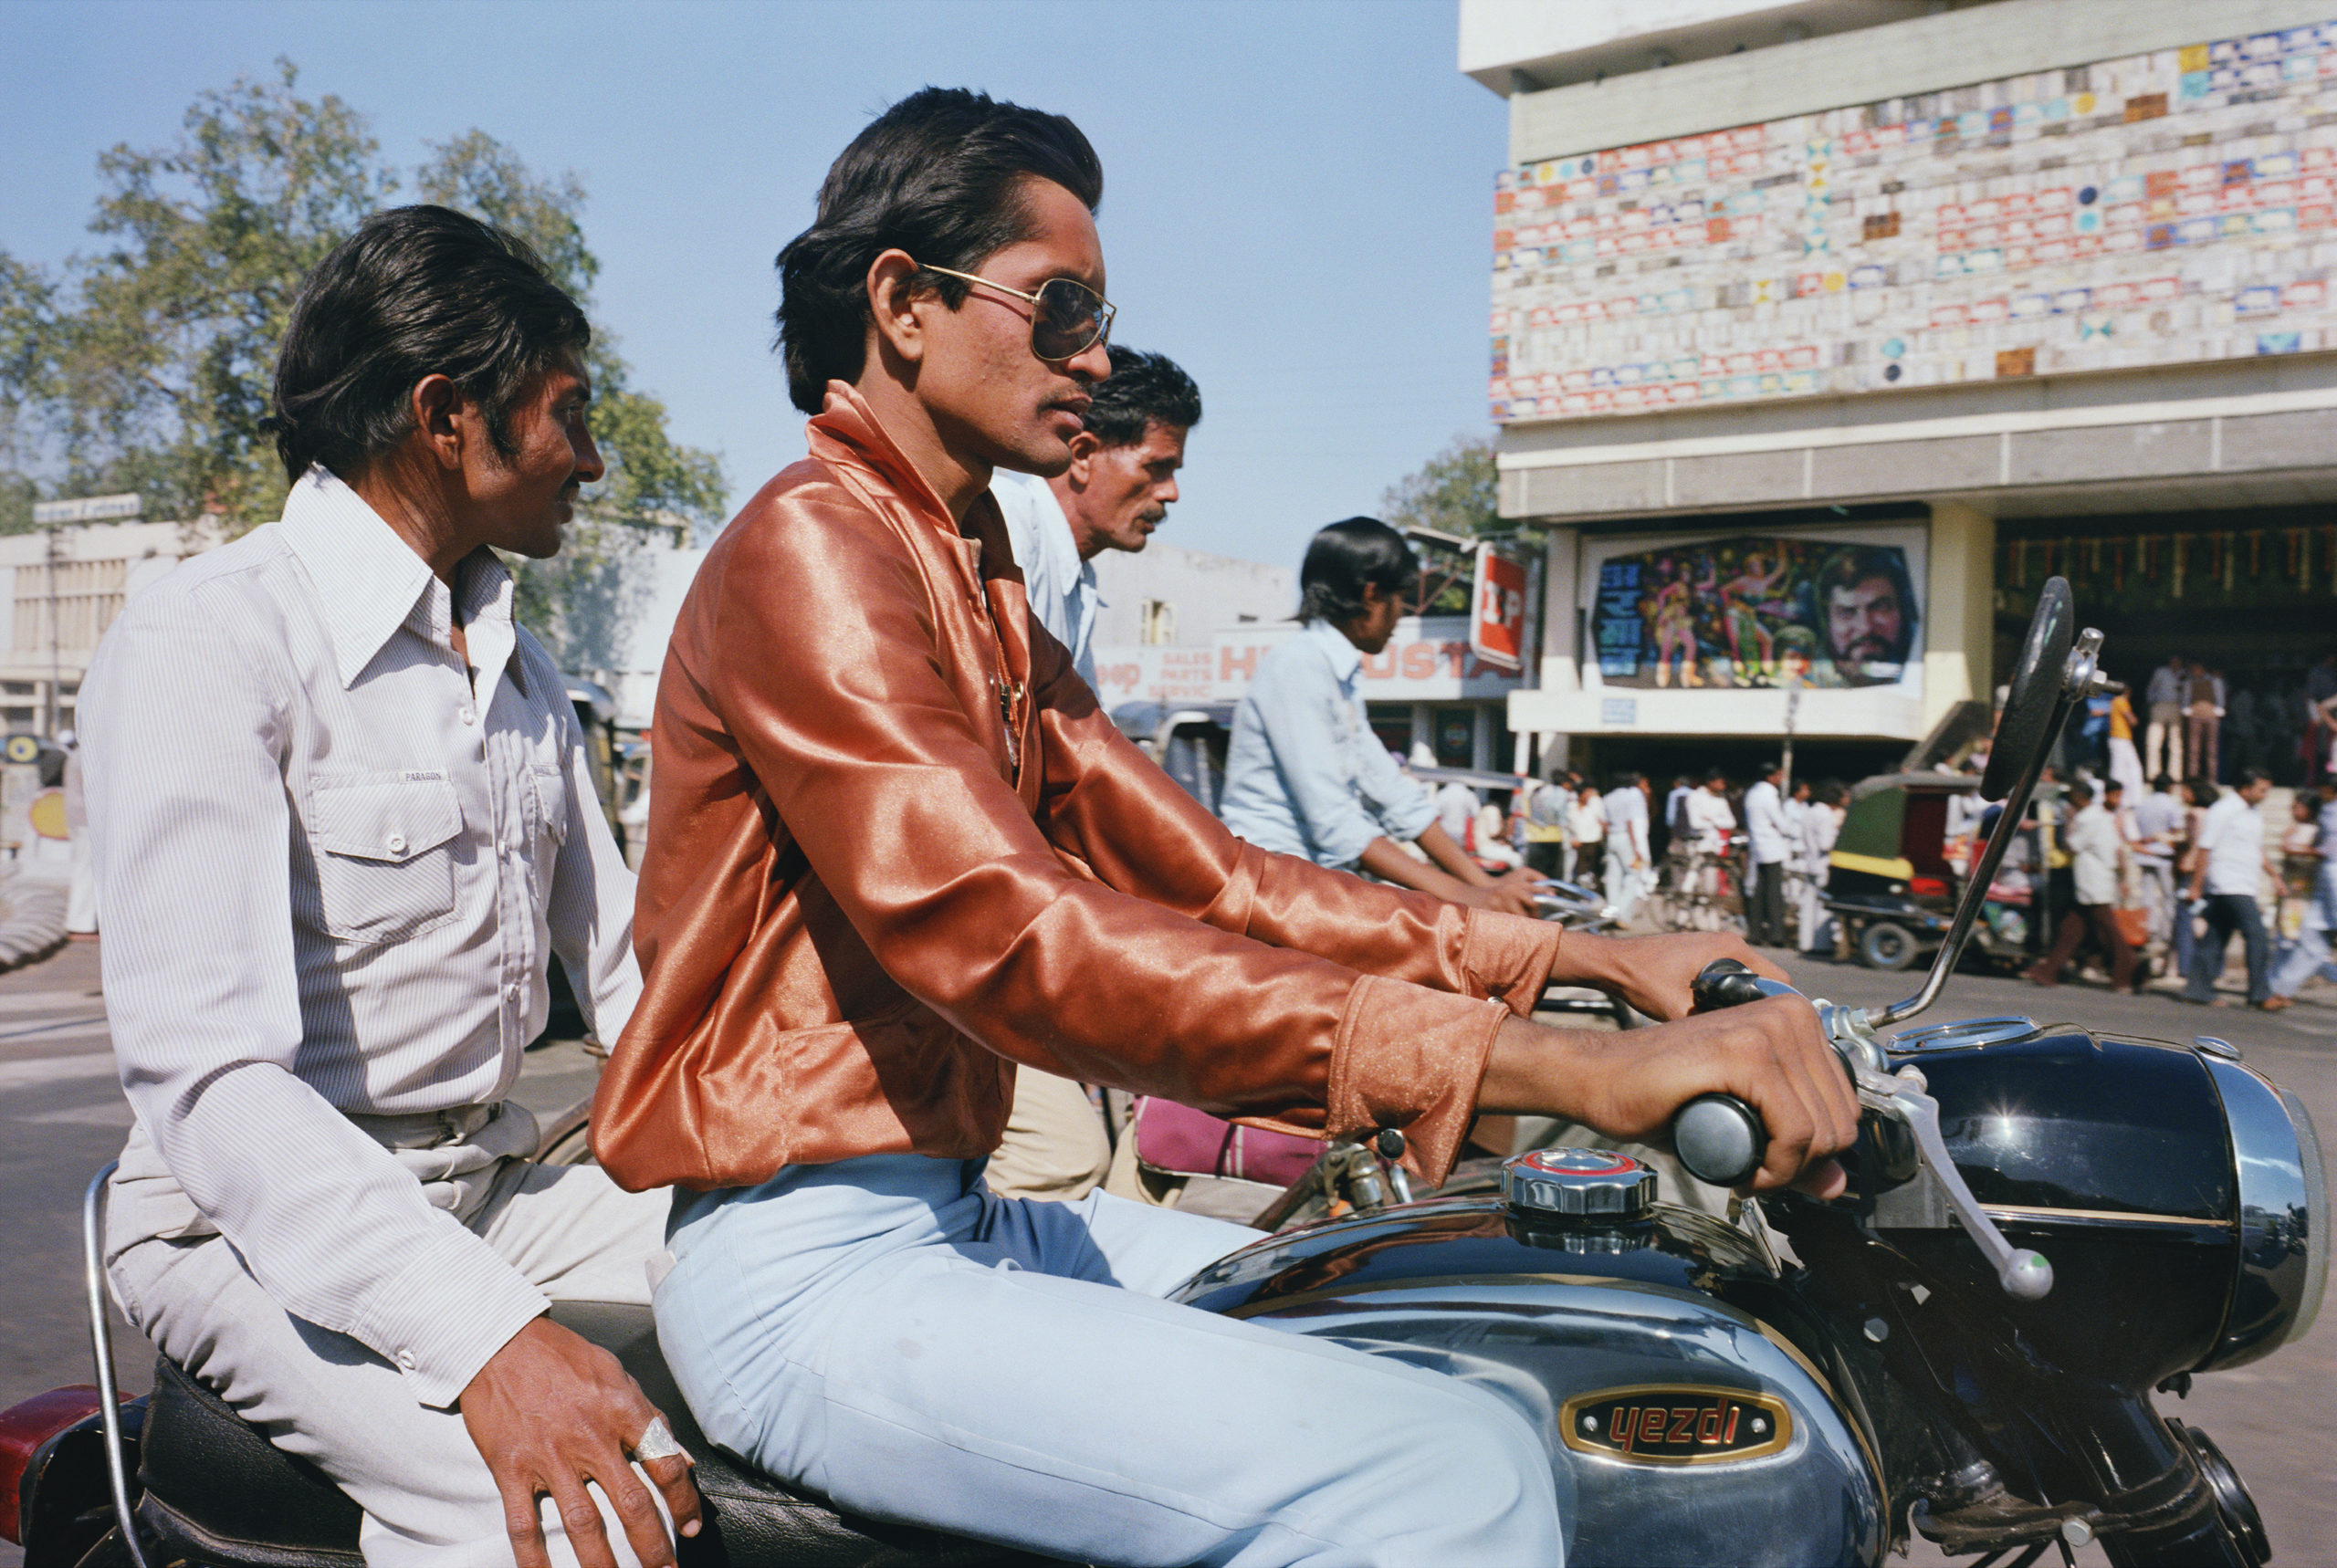 "Mitch Epstein in India, 1978-1989," courtesy of the Rencontres d’Arles.